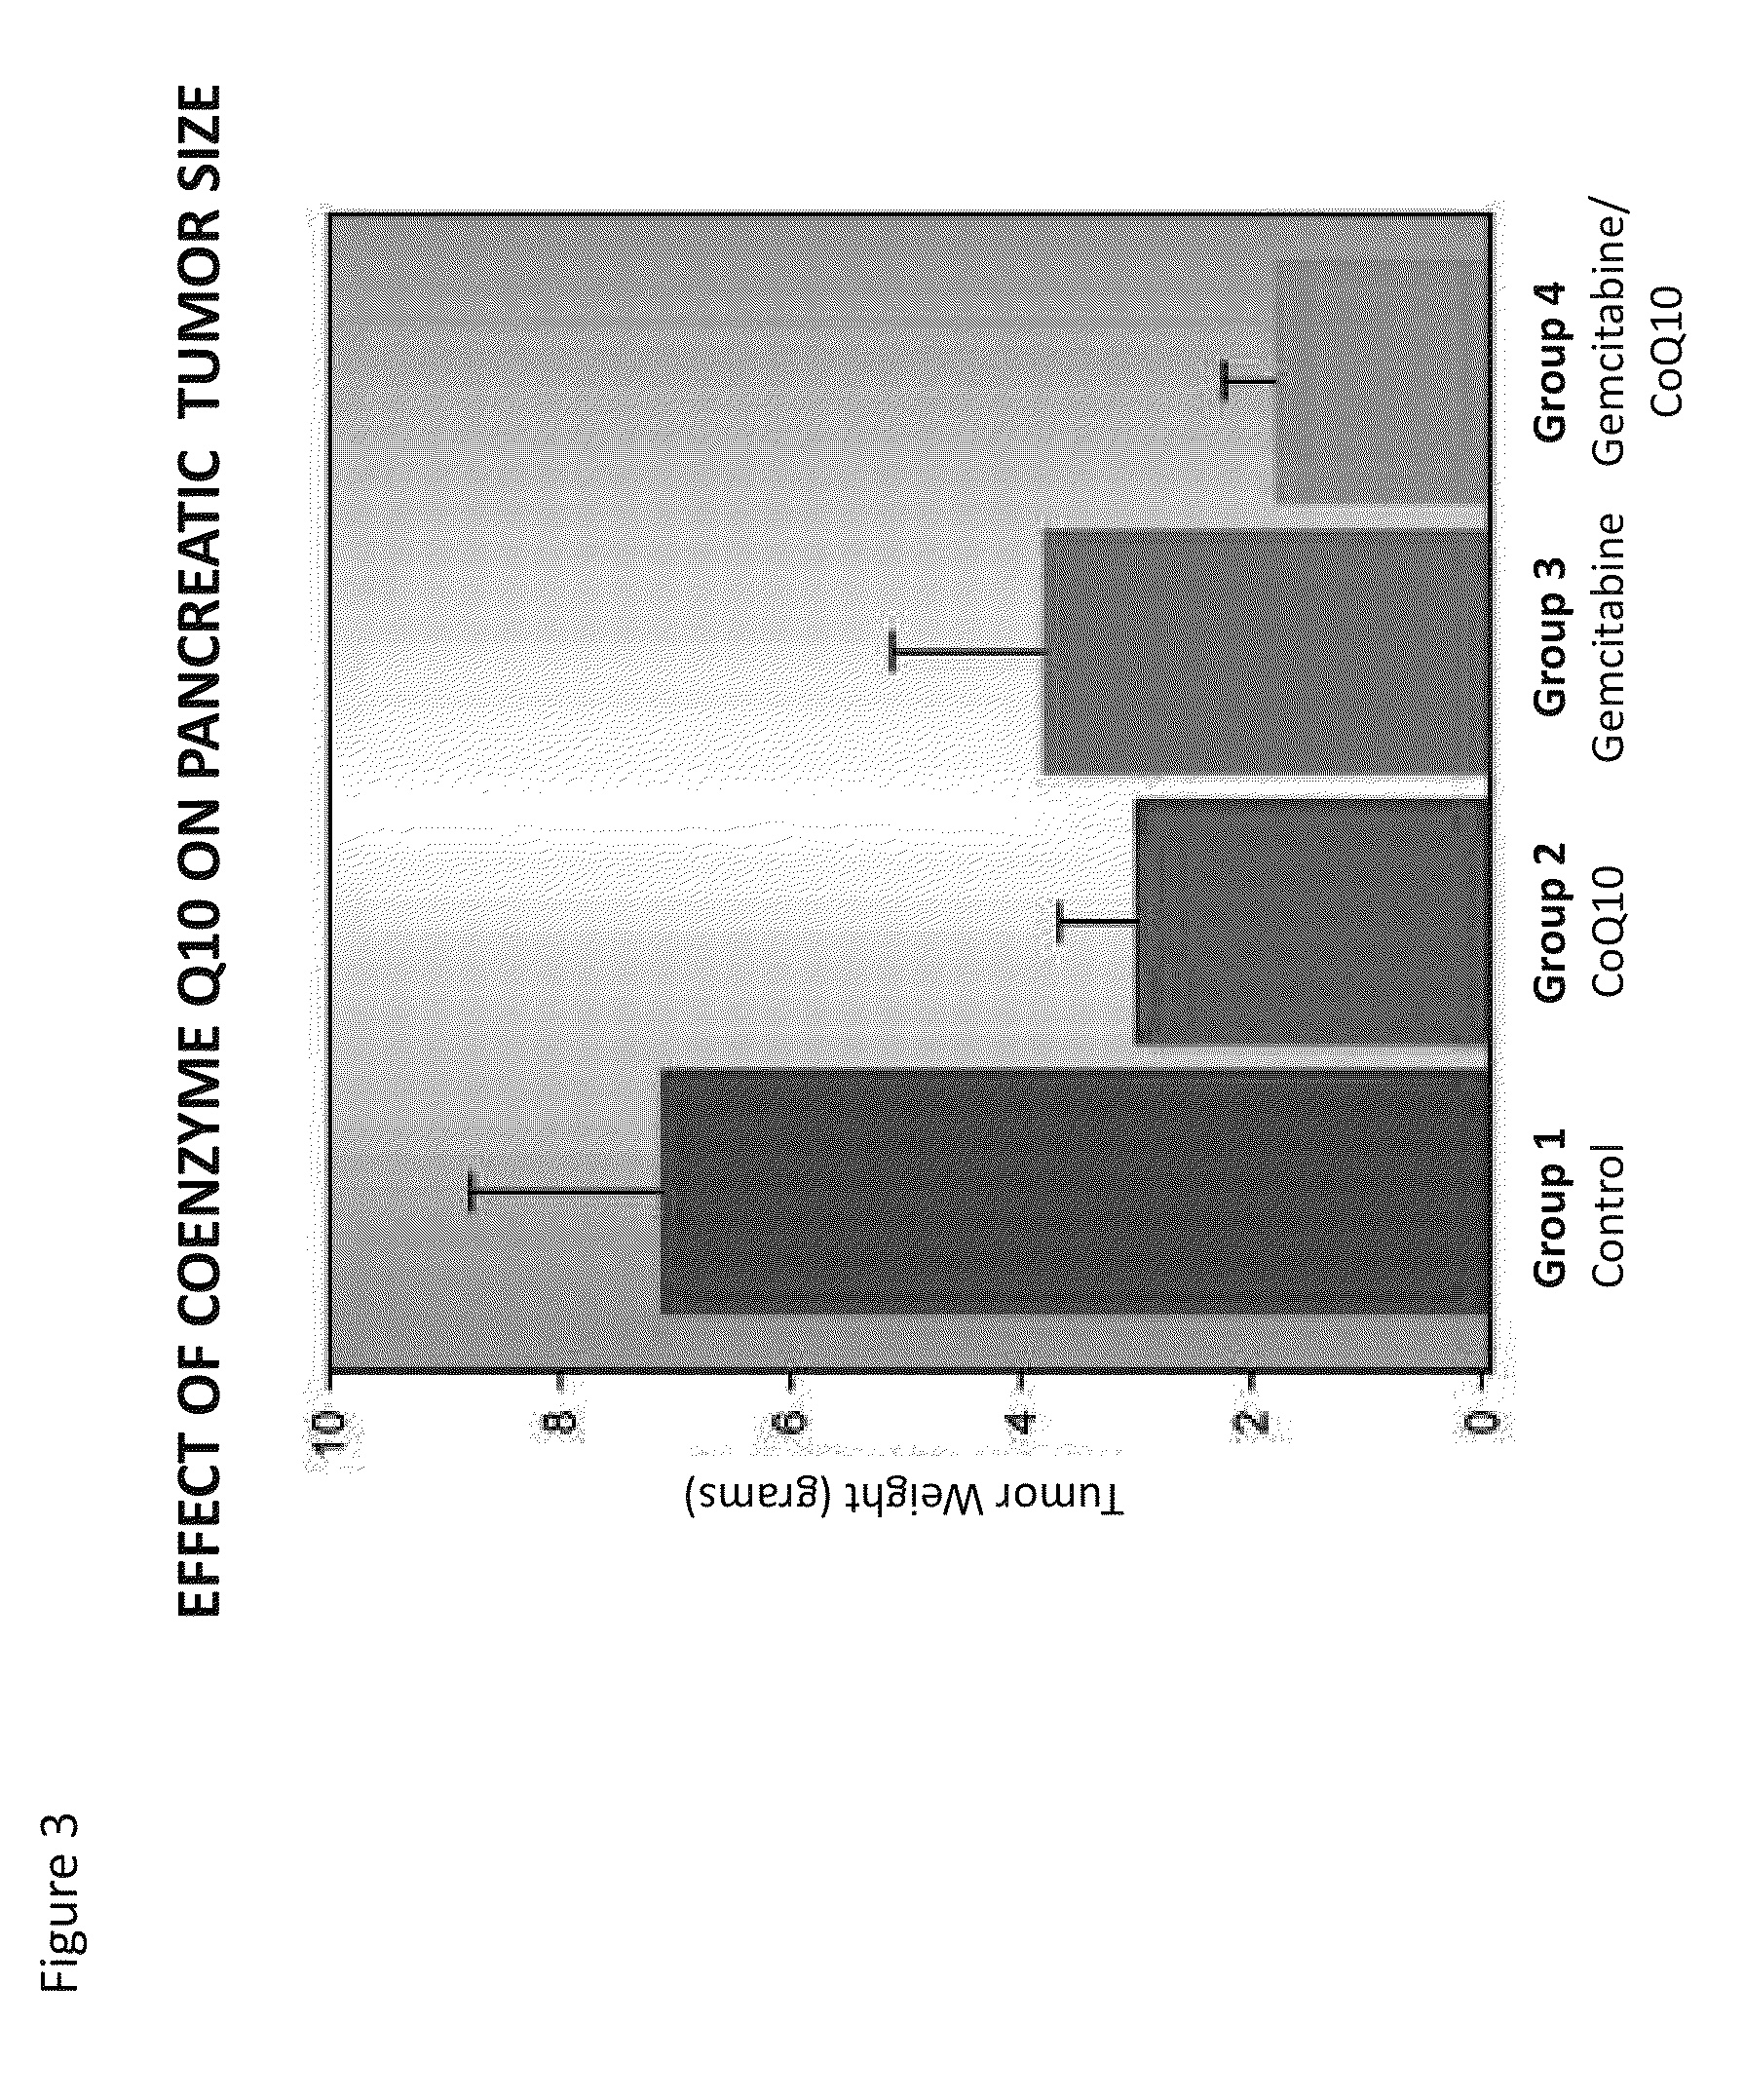 Methods for the treatment of cancer using coenzyme q10 combination therapies